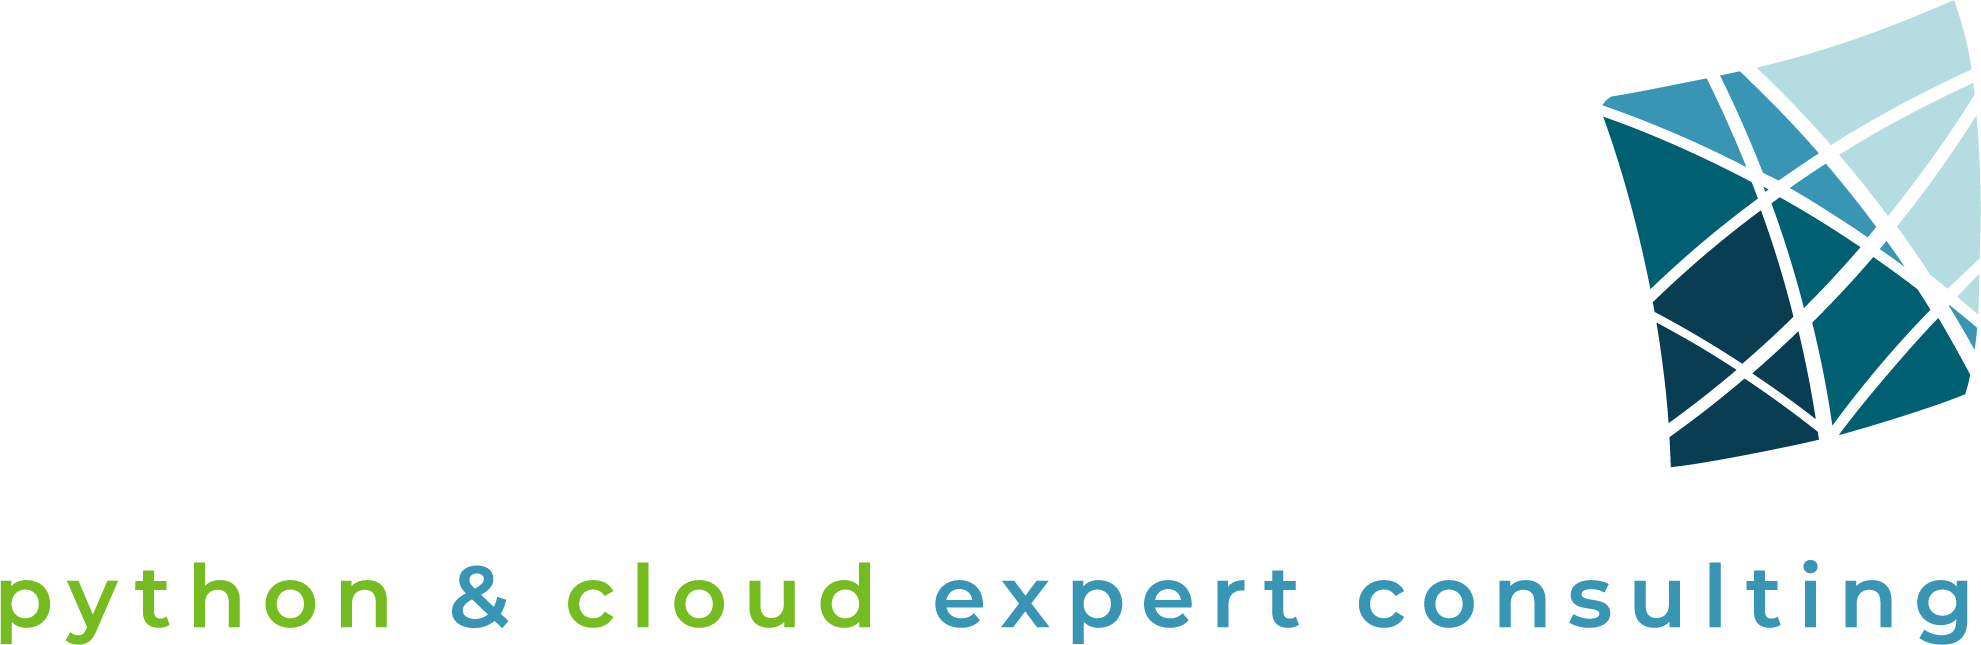 Six Feet Up - python & cloud expert consulting